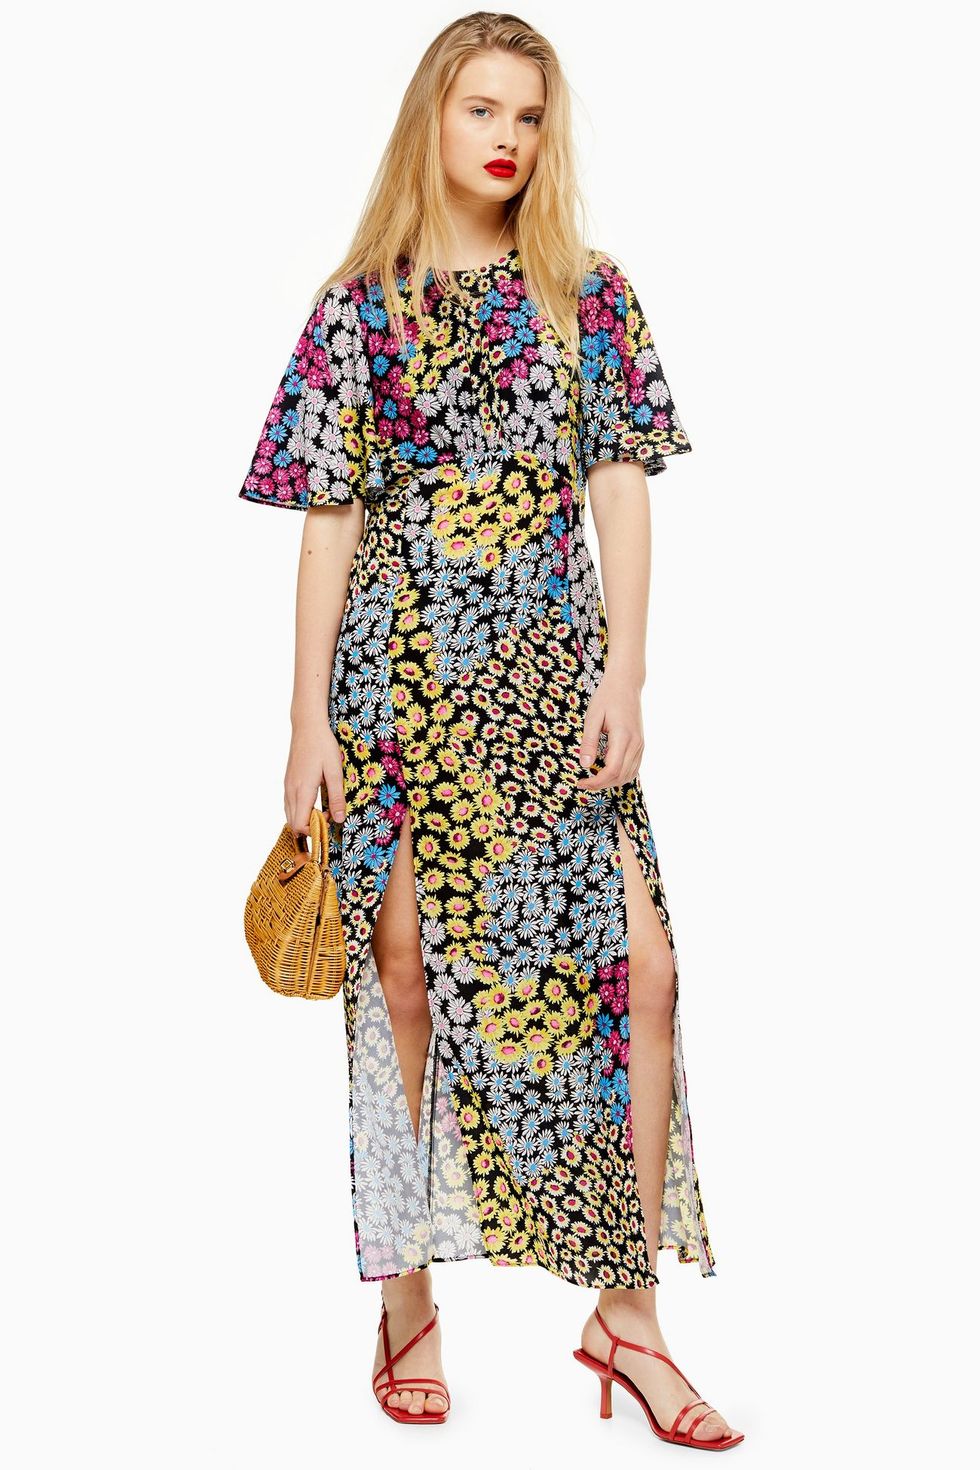 Topshop restocks sold-out Austin dress is back in five new prints